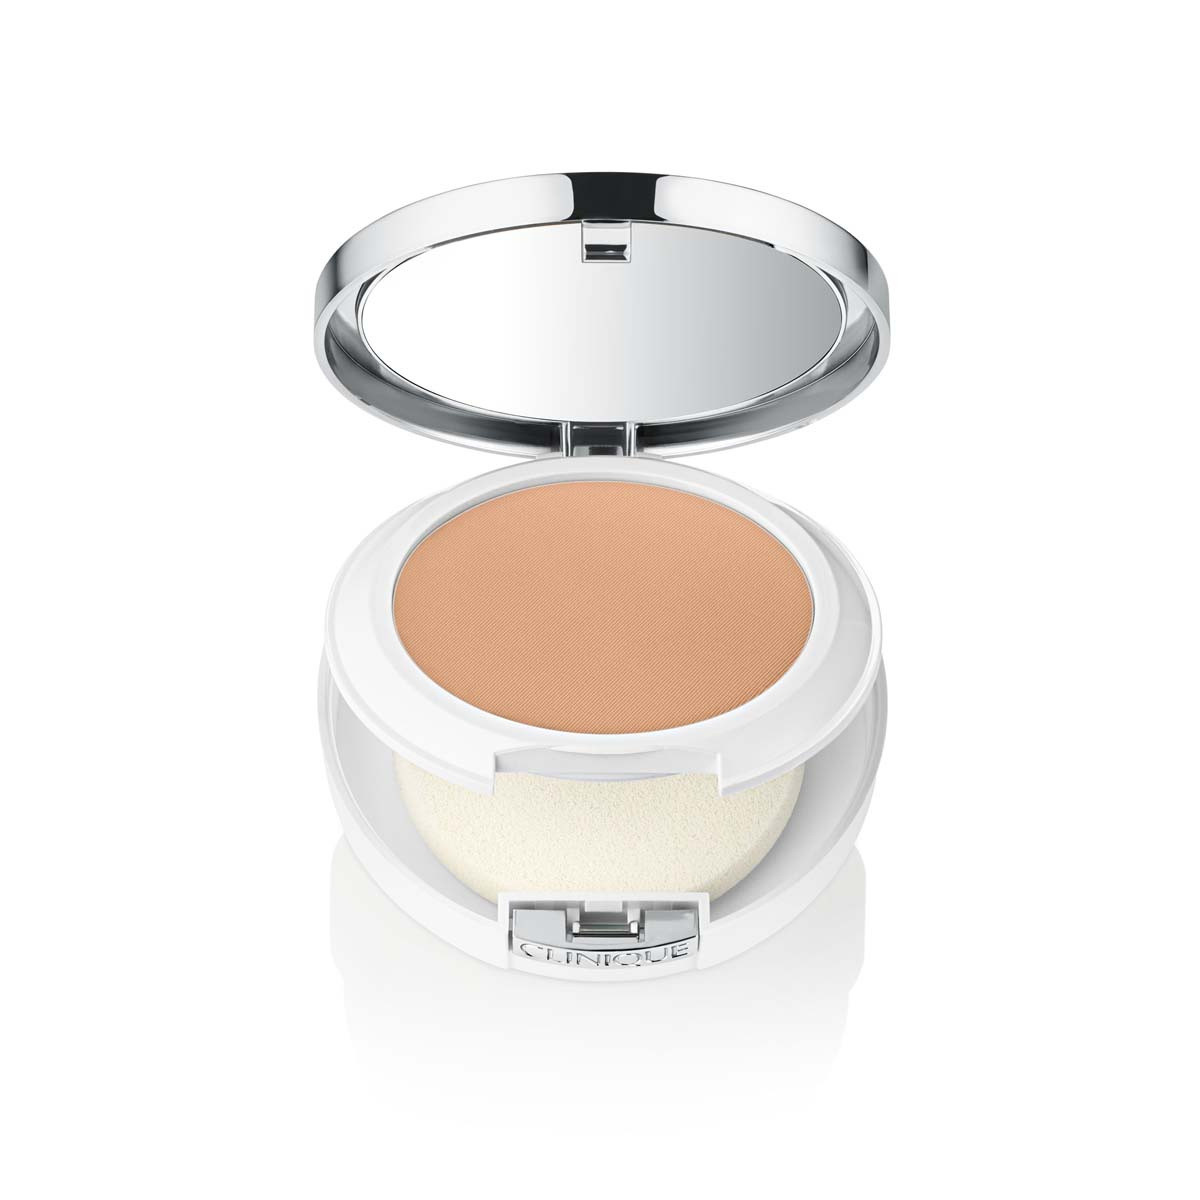 Clinique beyond perfecting powder foundation - 07 cream chamois  14,5 g, 07 CREAM CHAMOIS, large image number 0